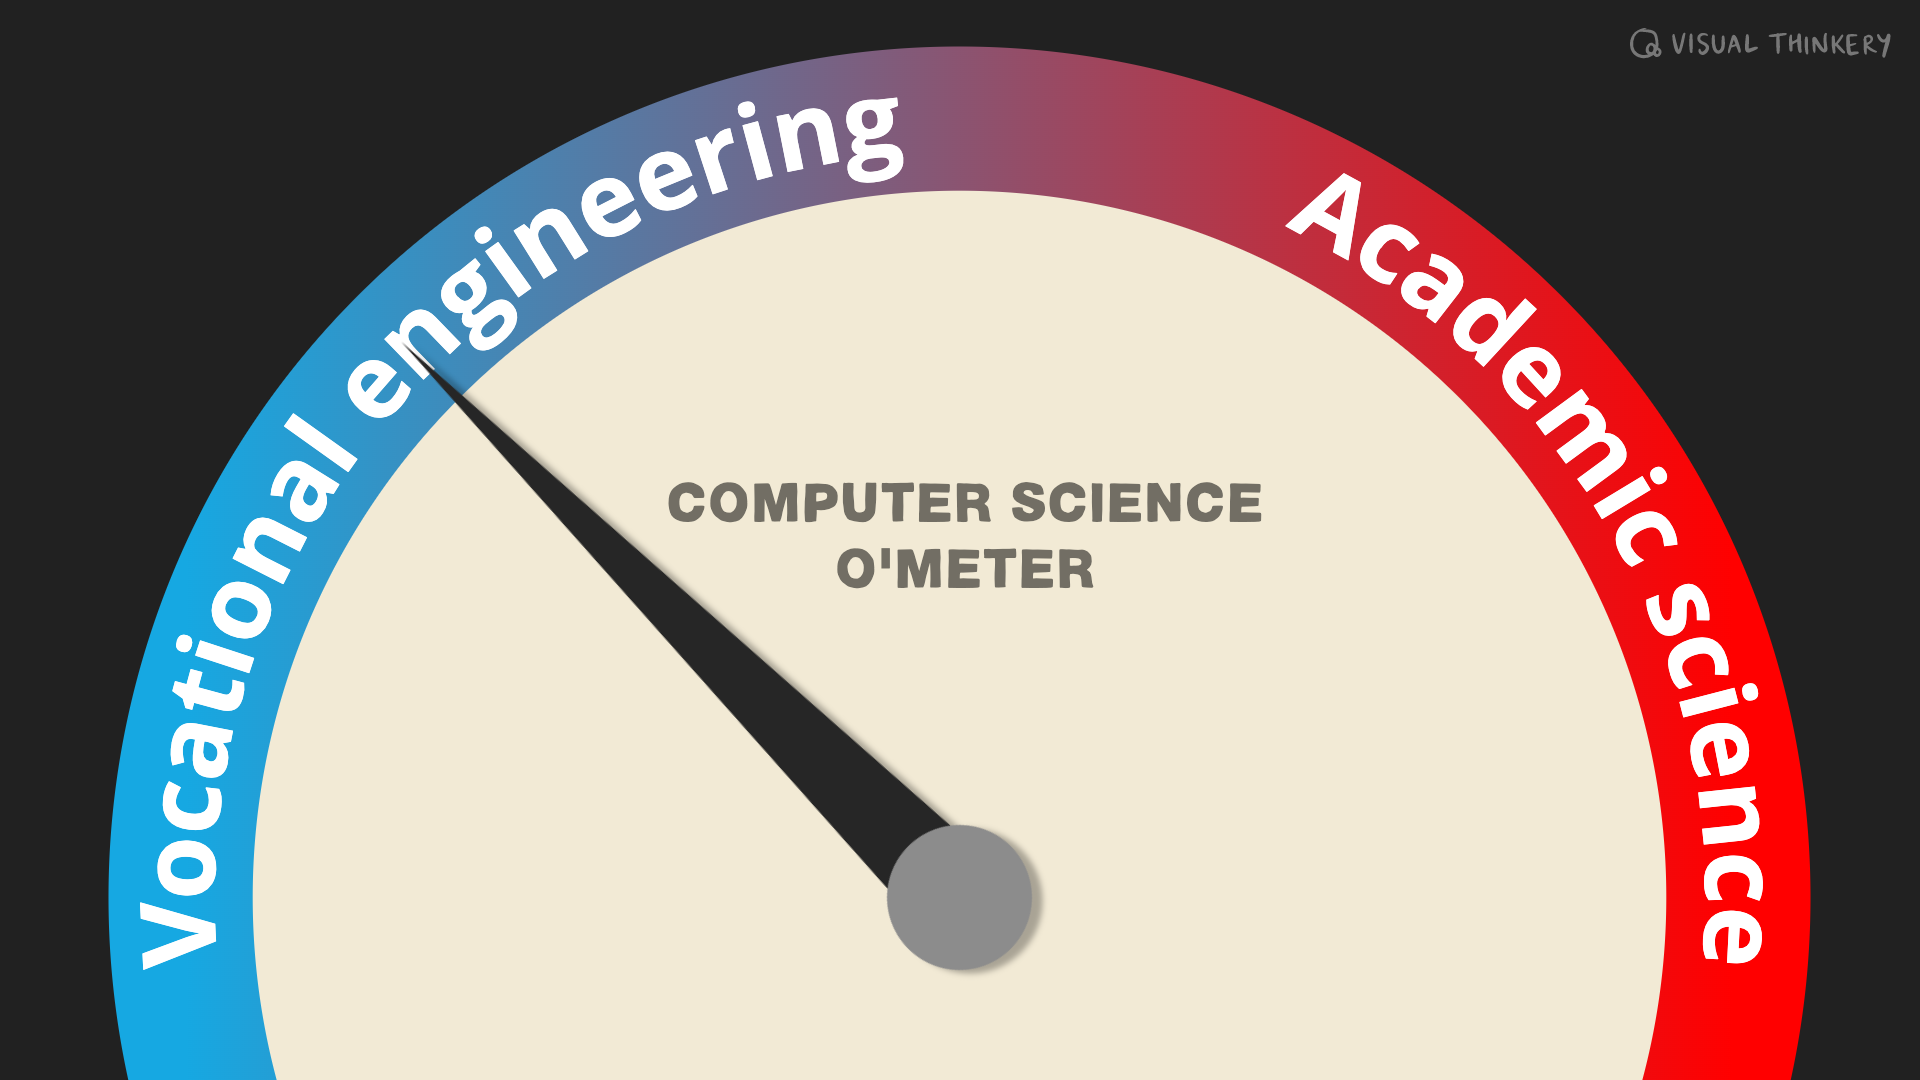 Where does your Computing degree fit on this Computer Science O'Meter? Are you theoretical and scientifically pure (red) (Munro 2008) ? Maybe you lean towards the highly vocational and applied aspects of engineering and technology (blue)? (Meulen 2023) Perhaps you’re a healthy balance of each? Computer Science O’Meter by Visual Thinkery is licensed under CC BY-SA. Remix by Yours Truly, make your own at remixer.visualthinkery.com